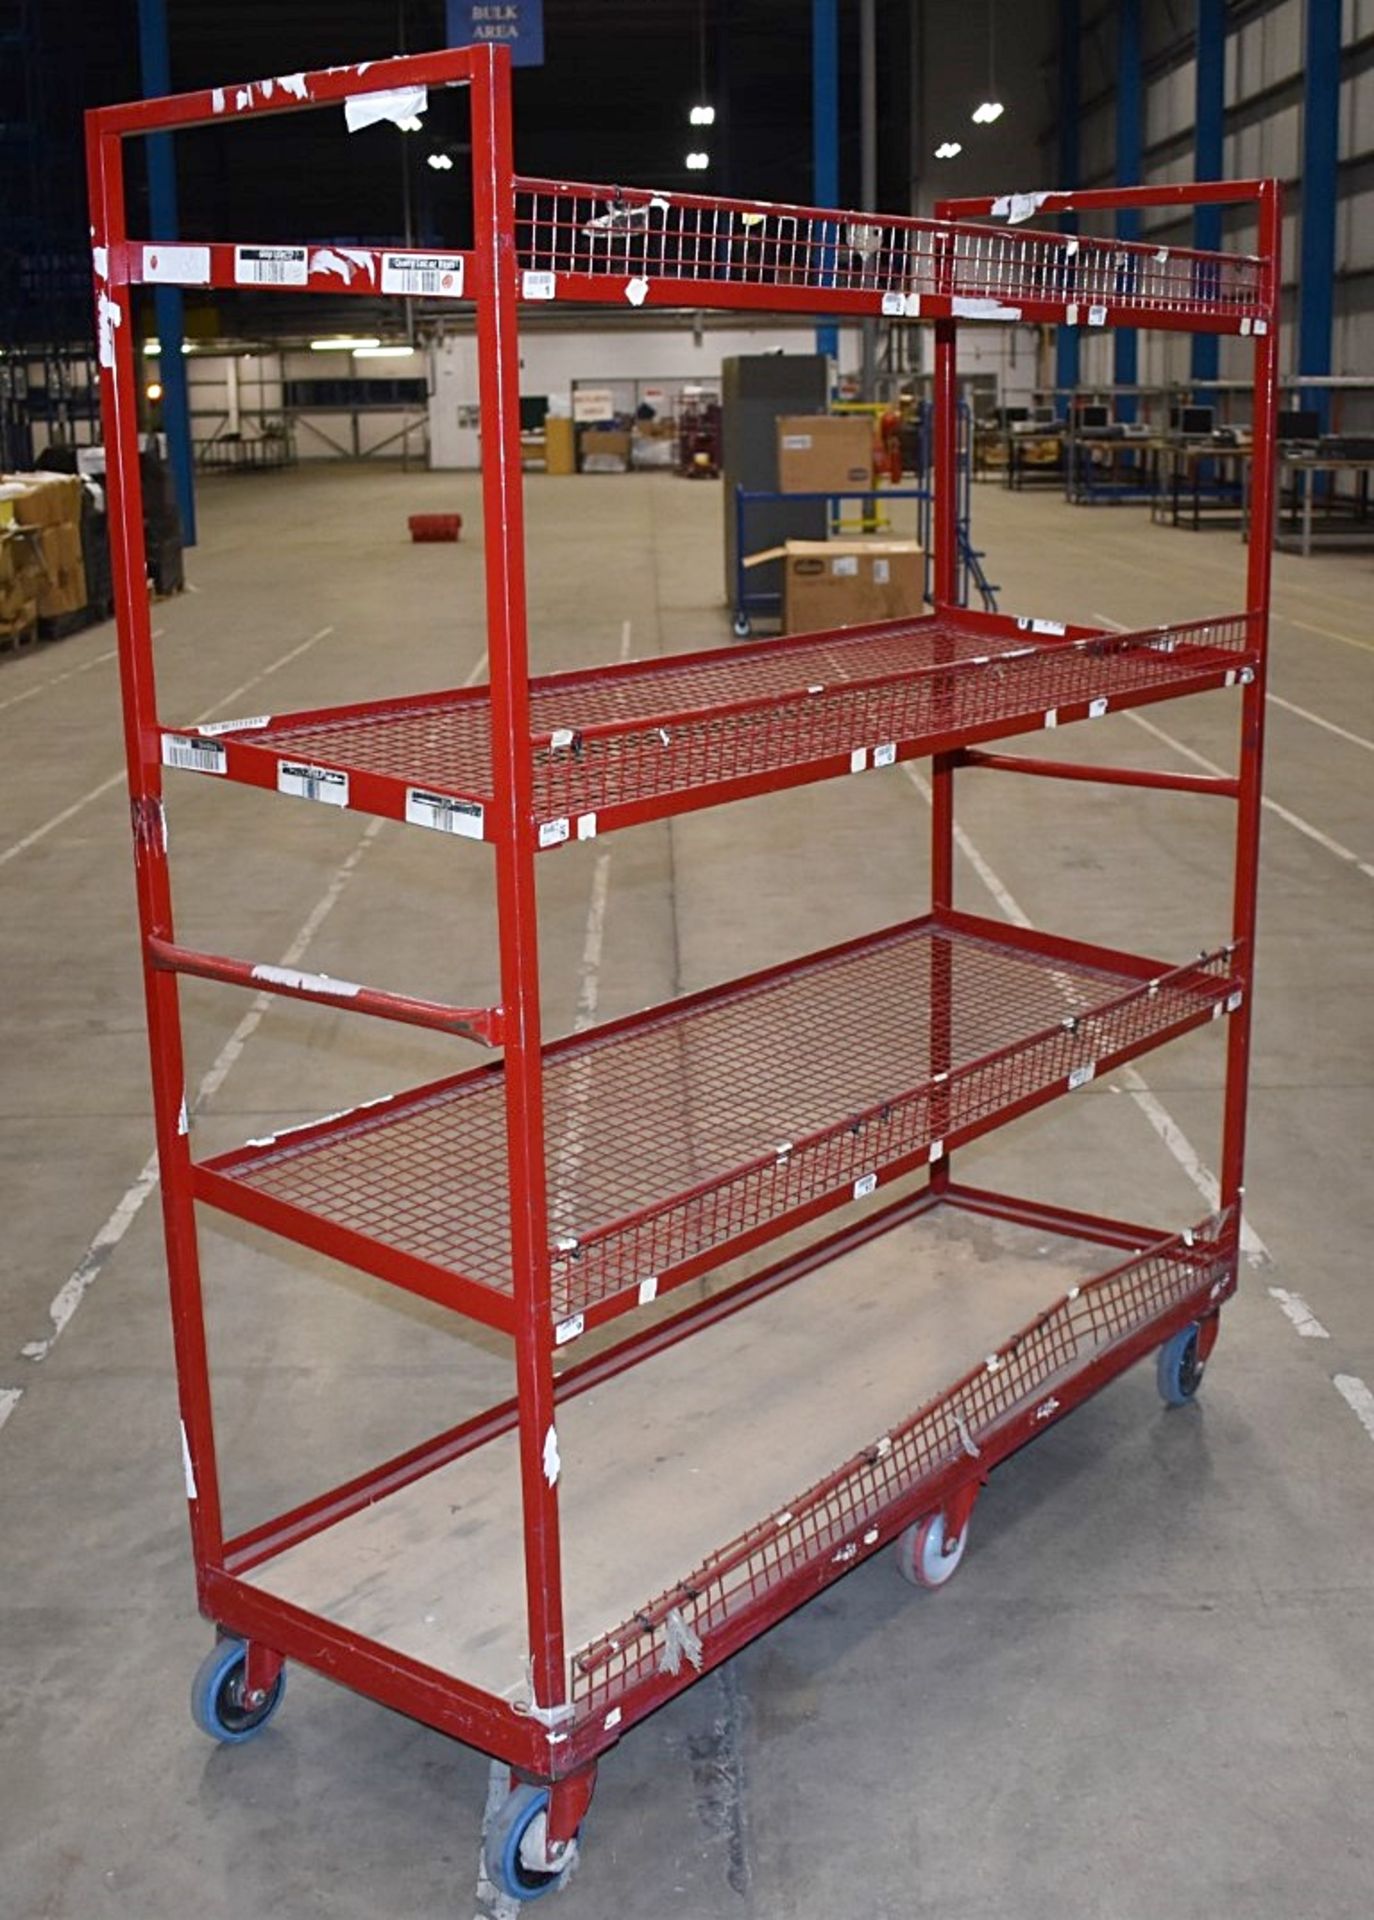 1 x Four Tier Metal Shelf Unit on Castors - Ideal For Warehouses or Offices etc - H180 x W160 x - Image 4 of 7